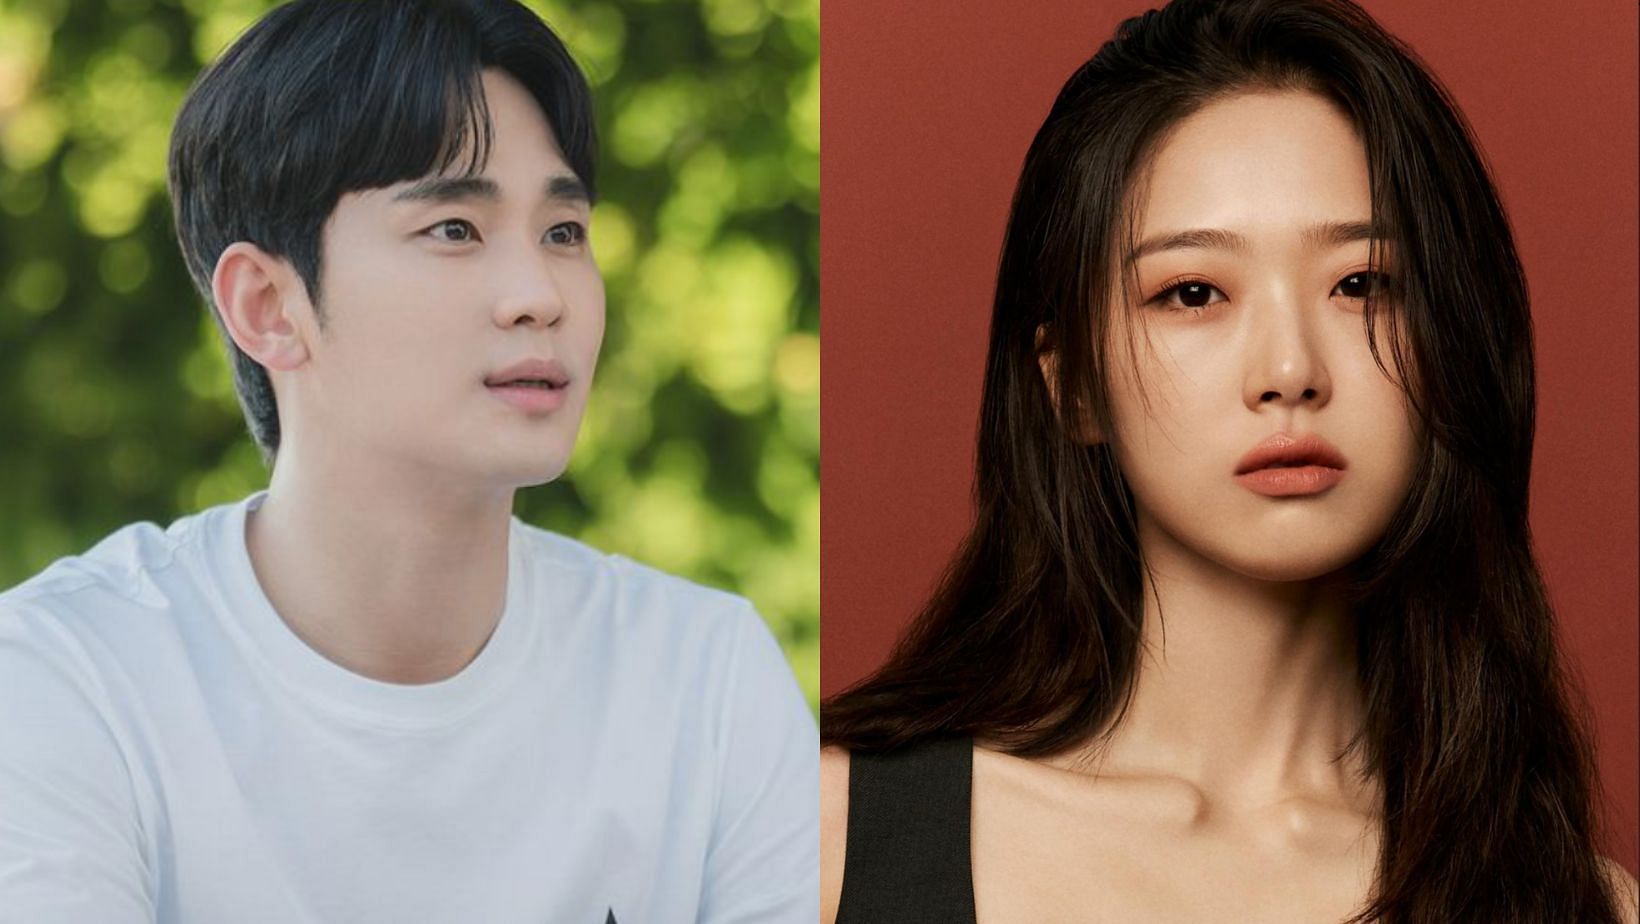 Kim Si-eun reported to join the cast along with Kim Soo-hyun in the upcoming black comedy drama Knock Off. (Images via Instagram/@_kimmsieun and @tvn_drama)